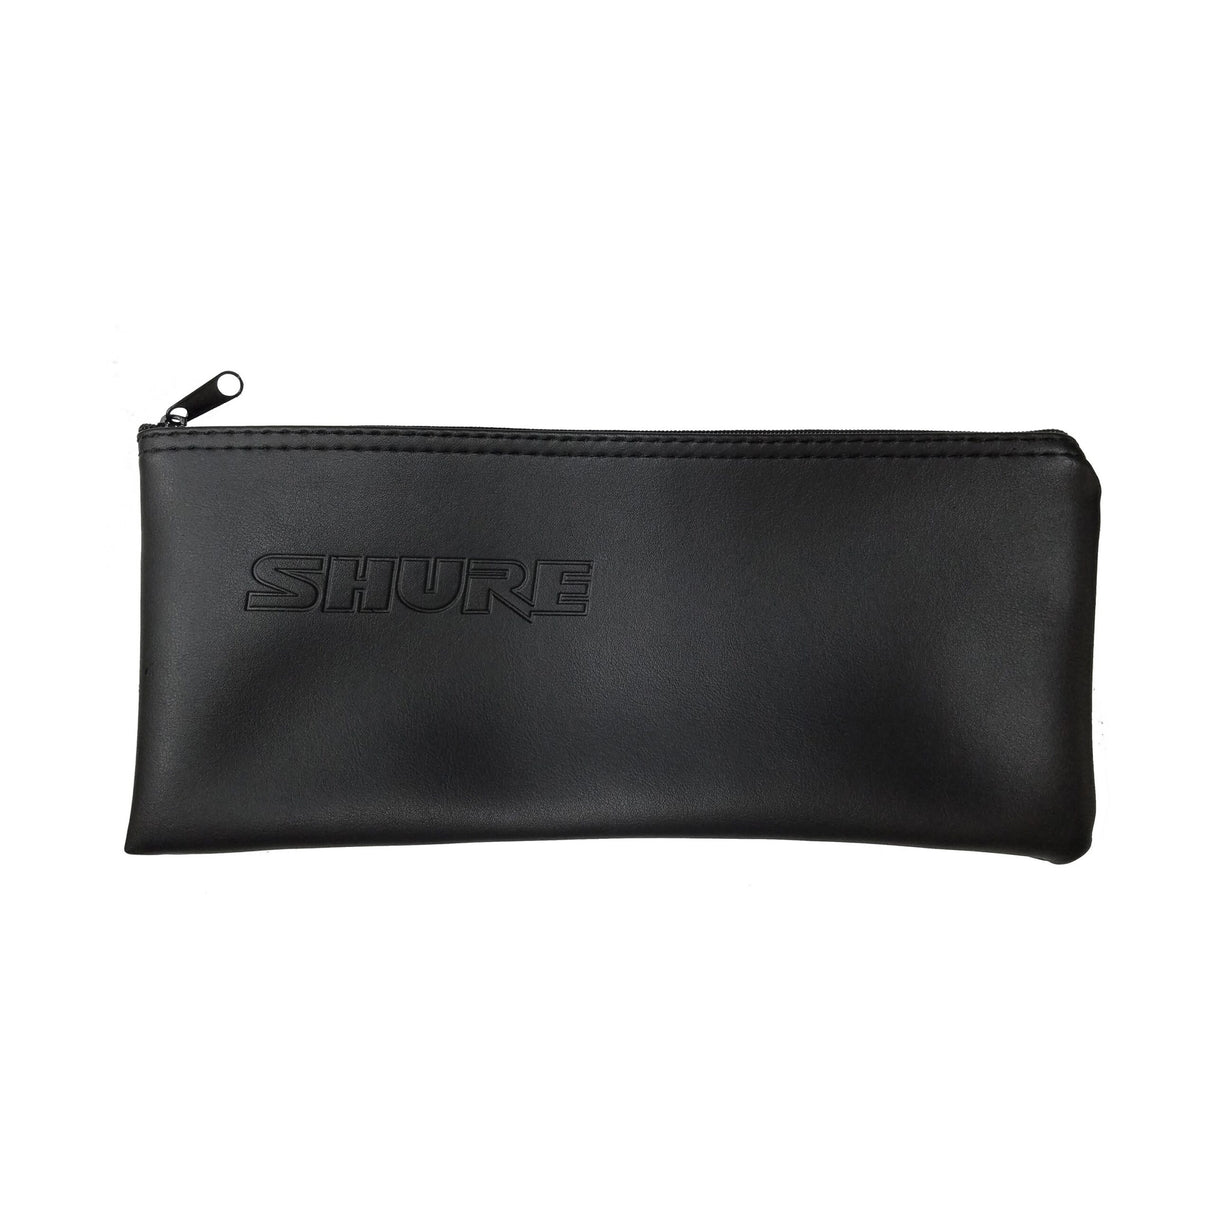 Shure 95A2313 Zippered Vinyl Pouch for Microphones